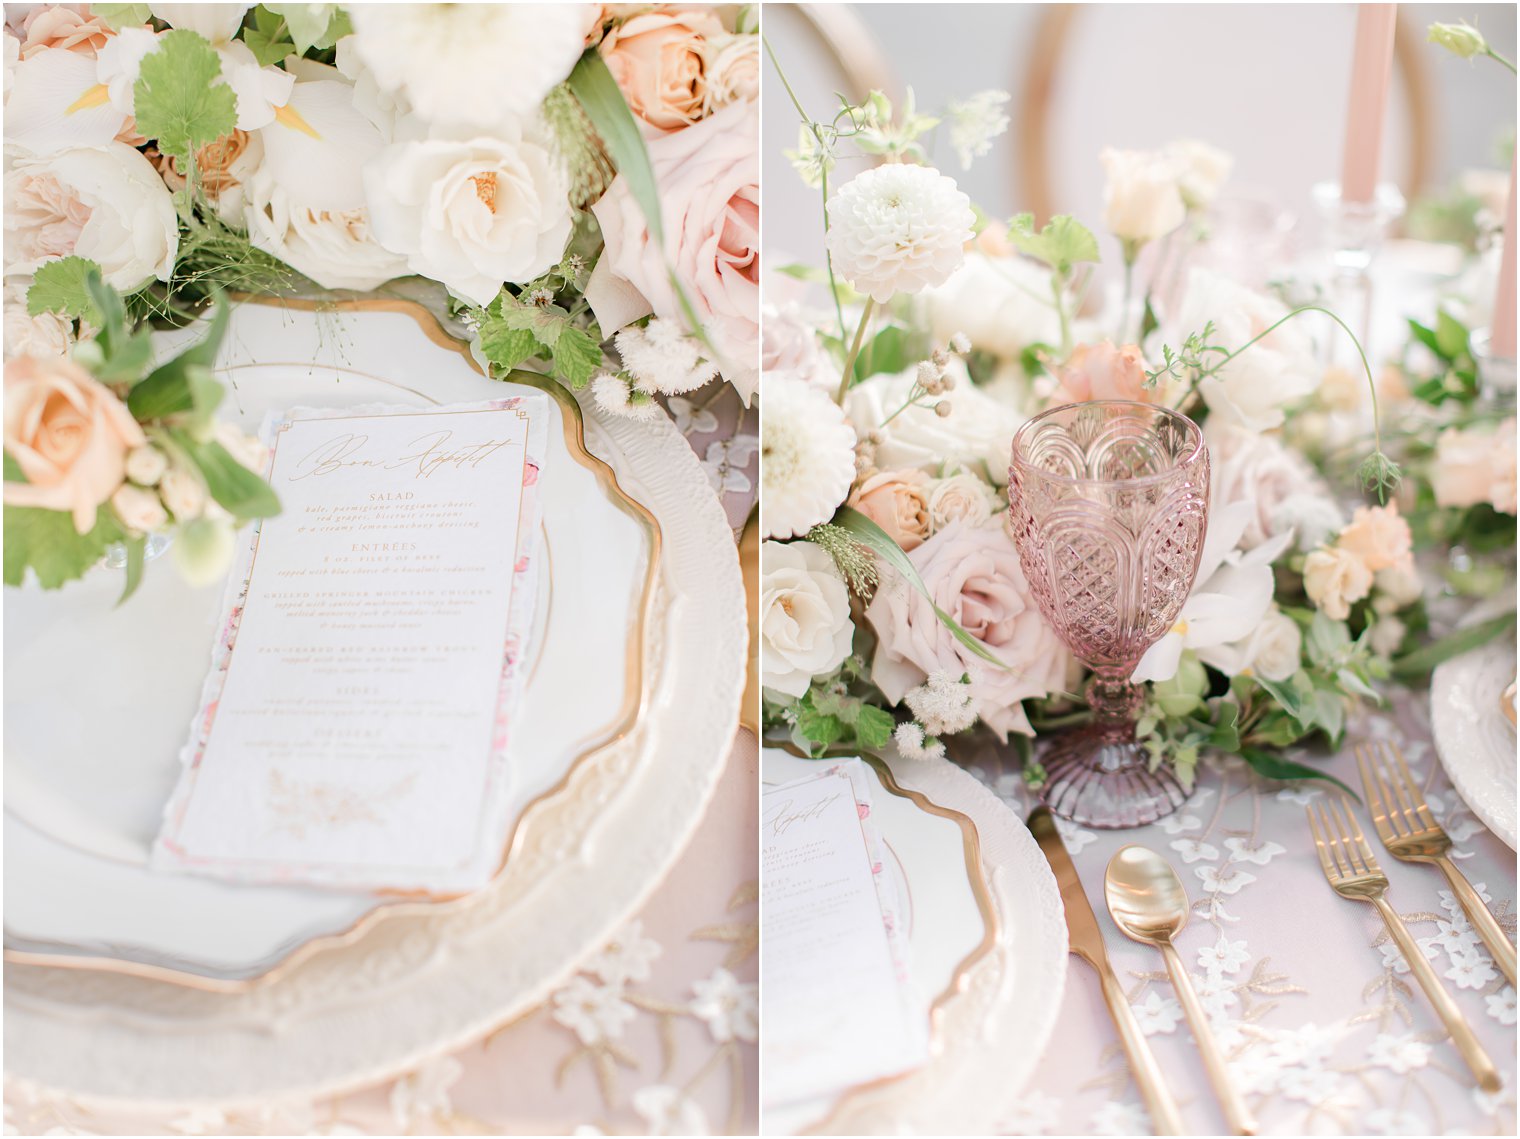 Romantic peach and cream wedding tablescape by Rosaspina Florist | Wedding at Park Chateau Estate